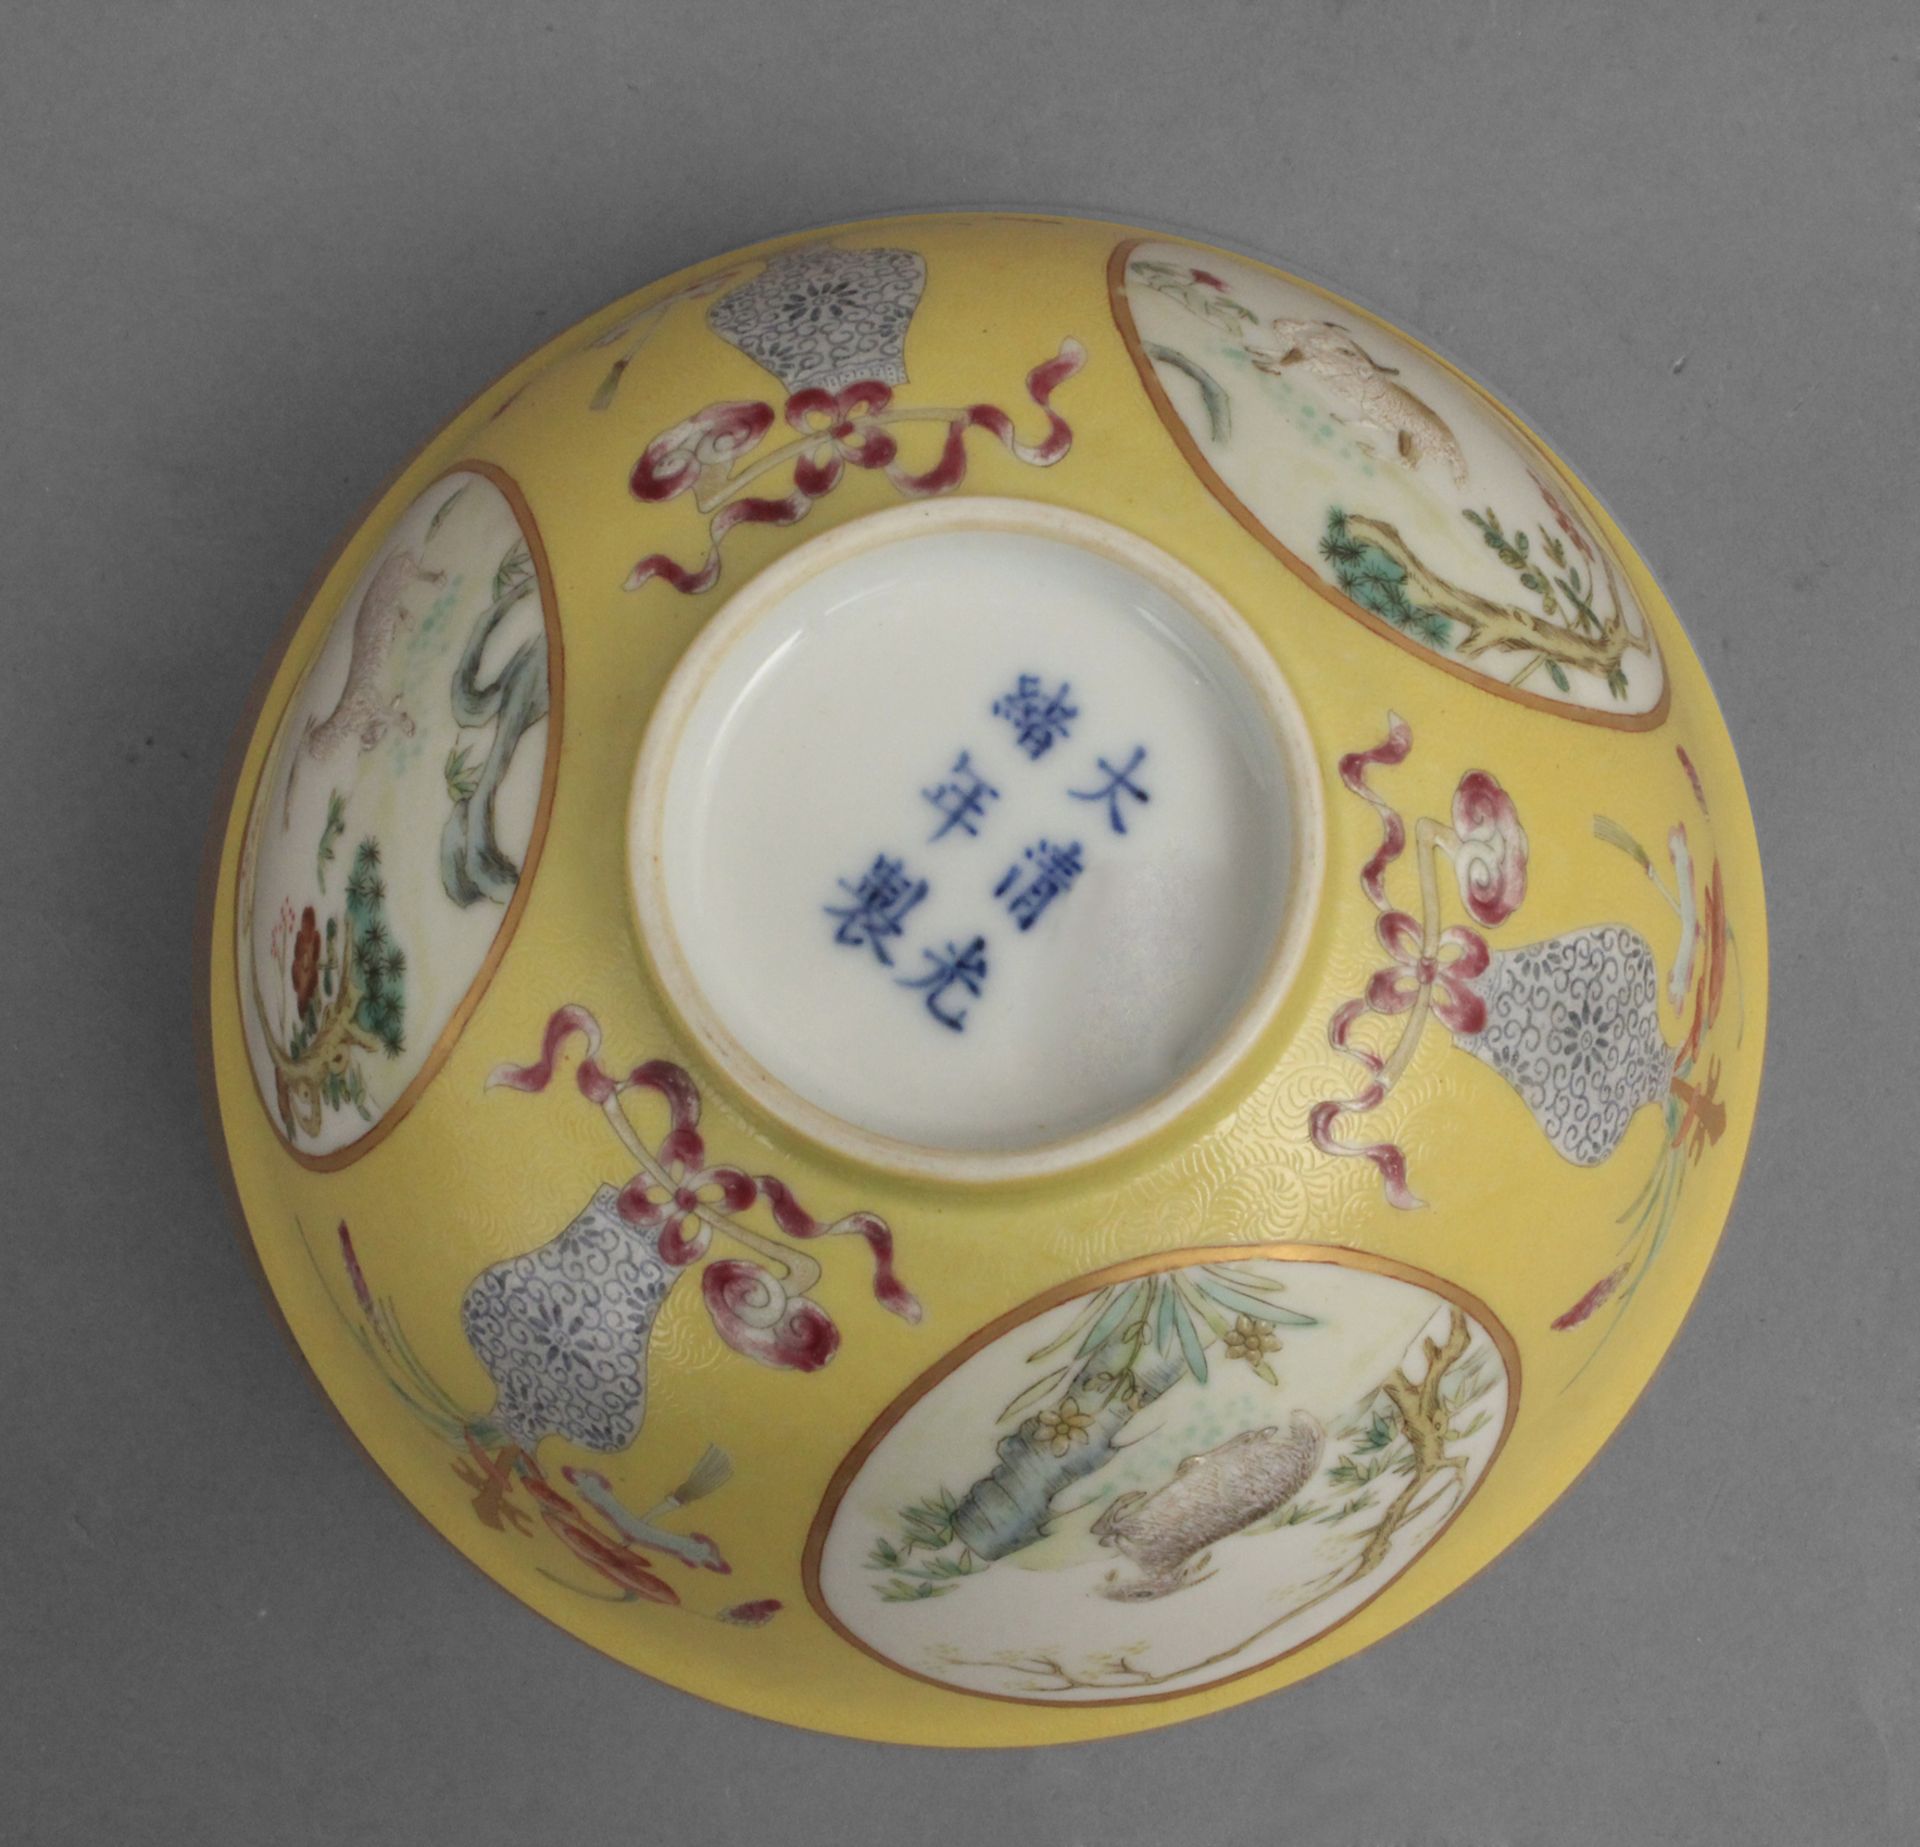 Late 19th century-early 20th century Chinese porcelain bowl - Image 3 of 5